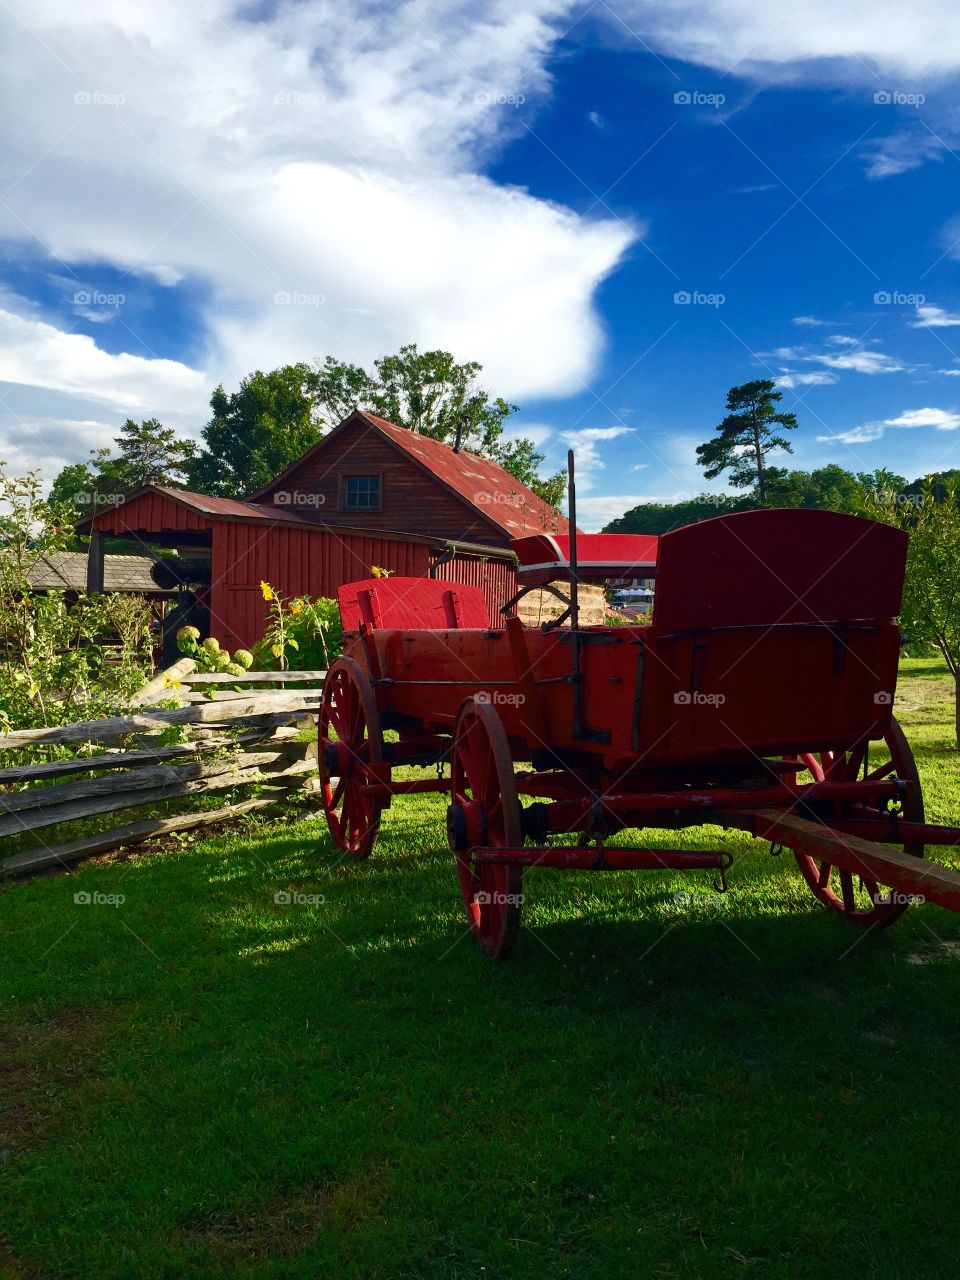 RED carriage wagon and red barn